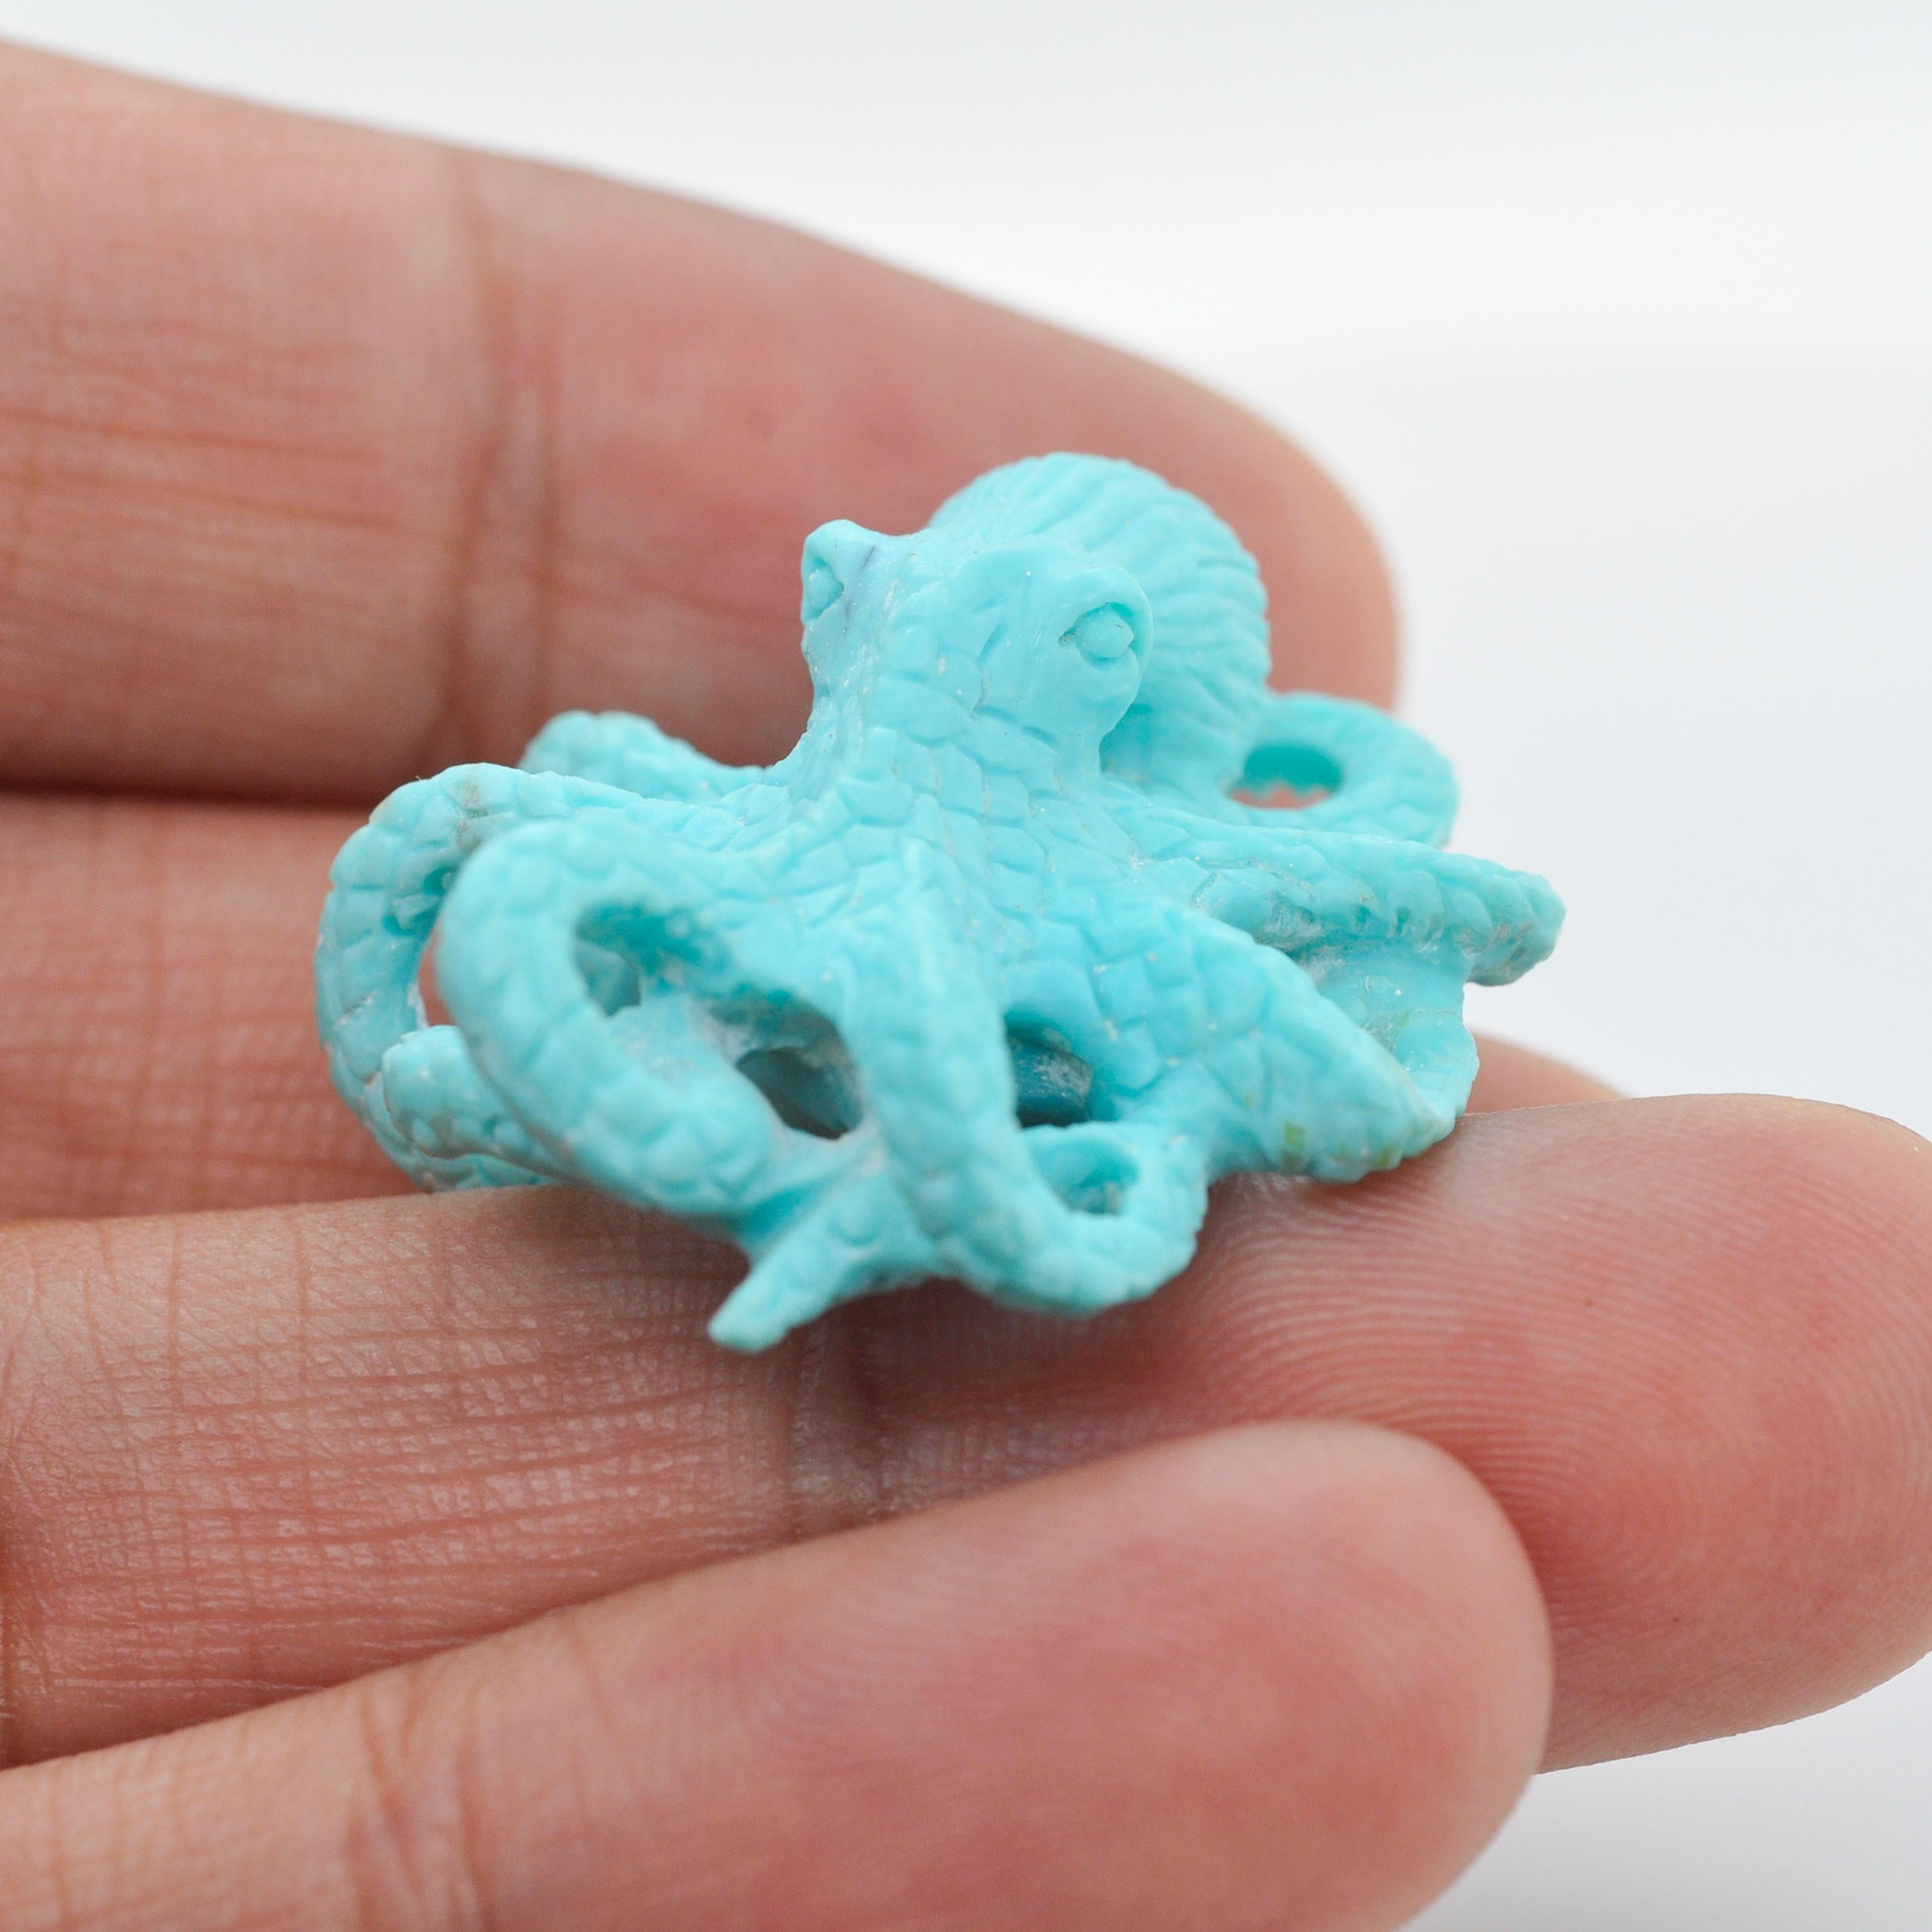 Contemporary Hand Carved 31.81 Carat Natural Arizona Turquoise Octopus Carving Pendant Brooch